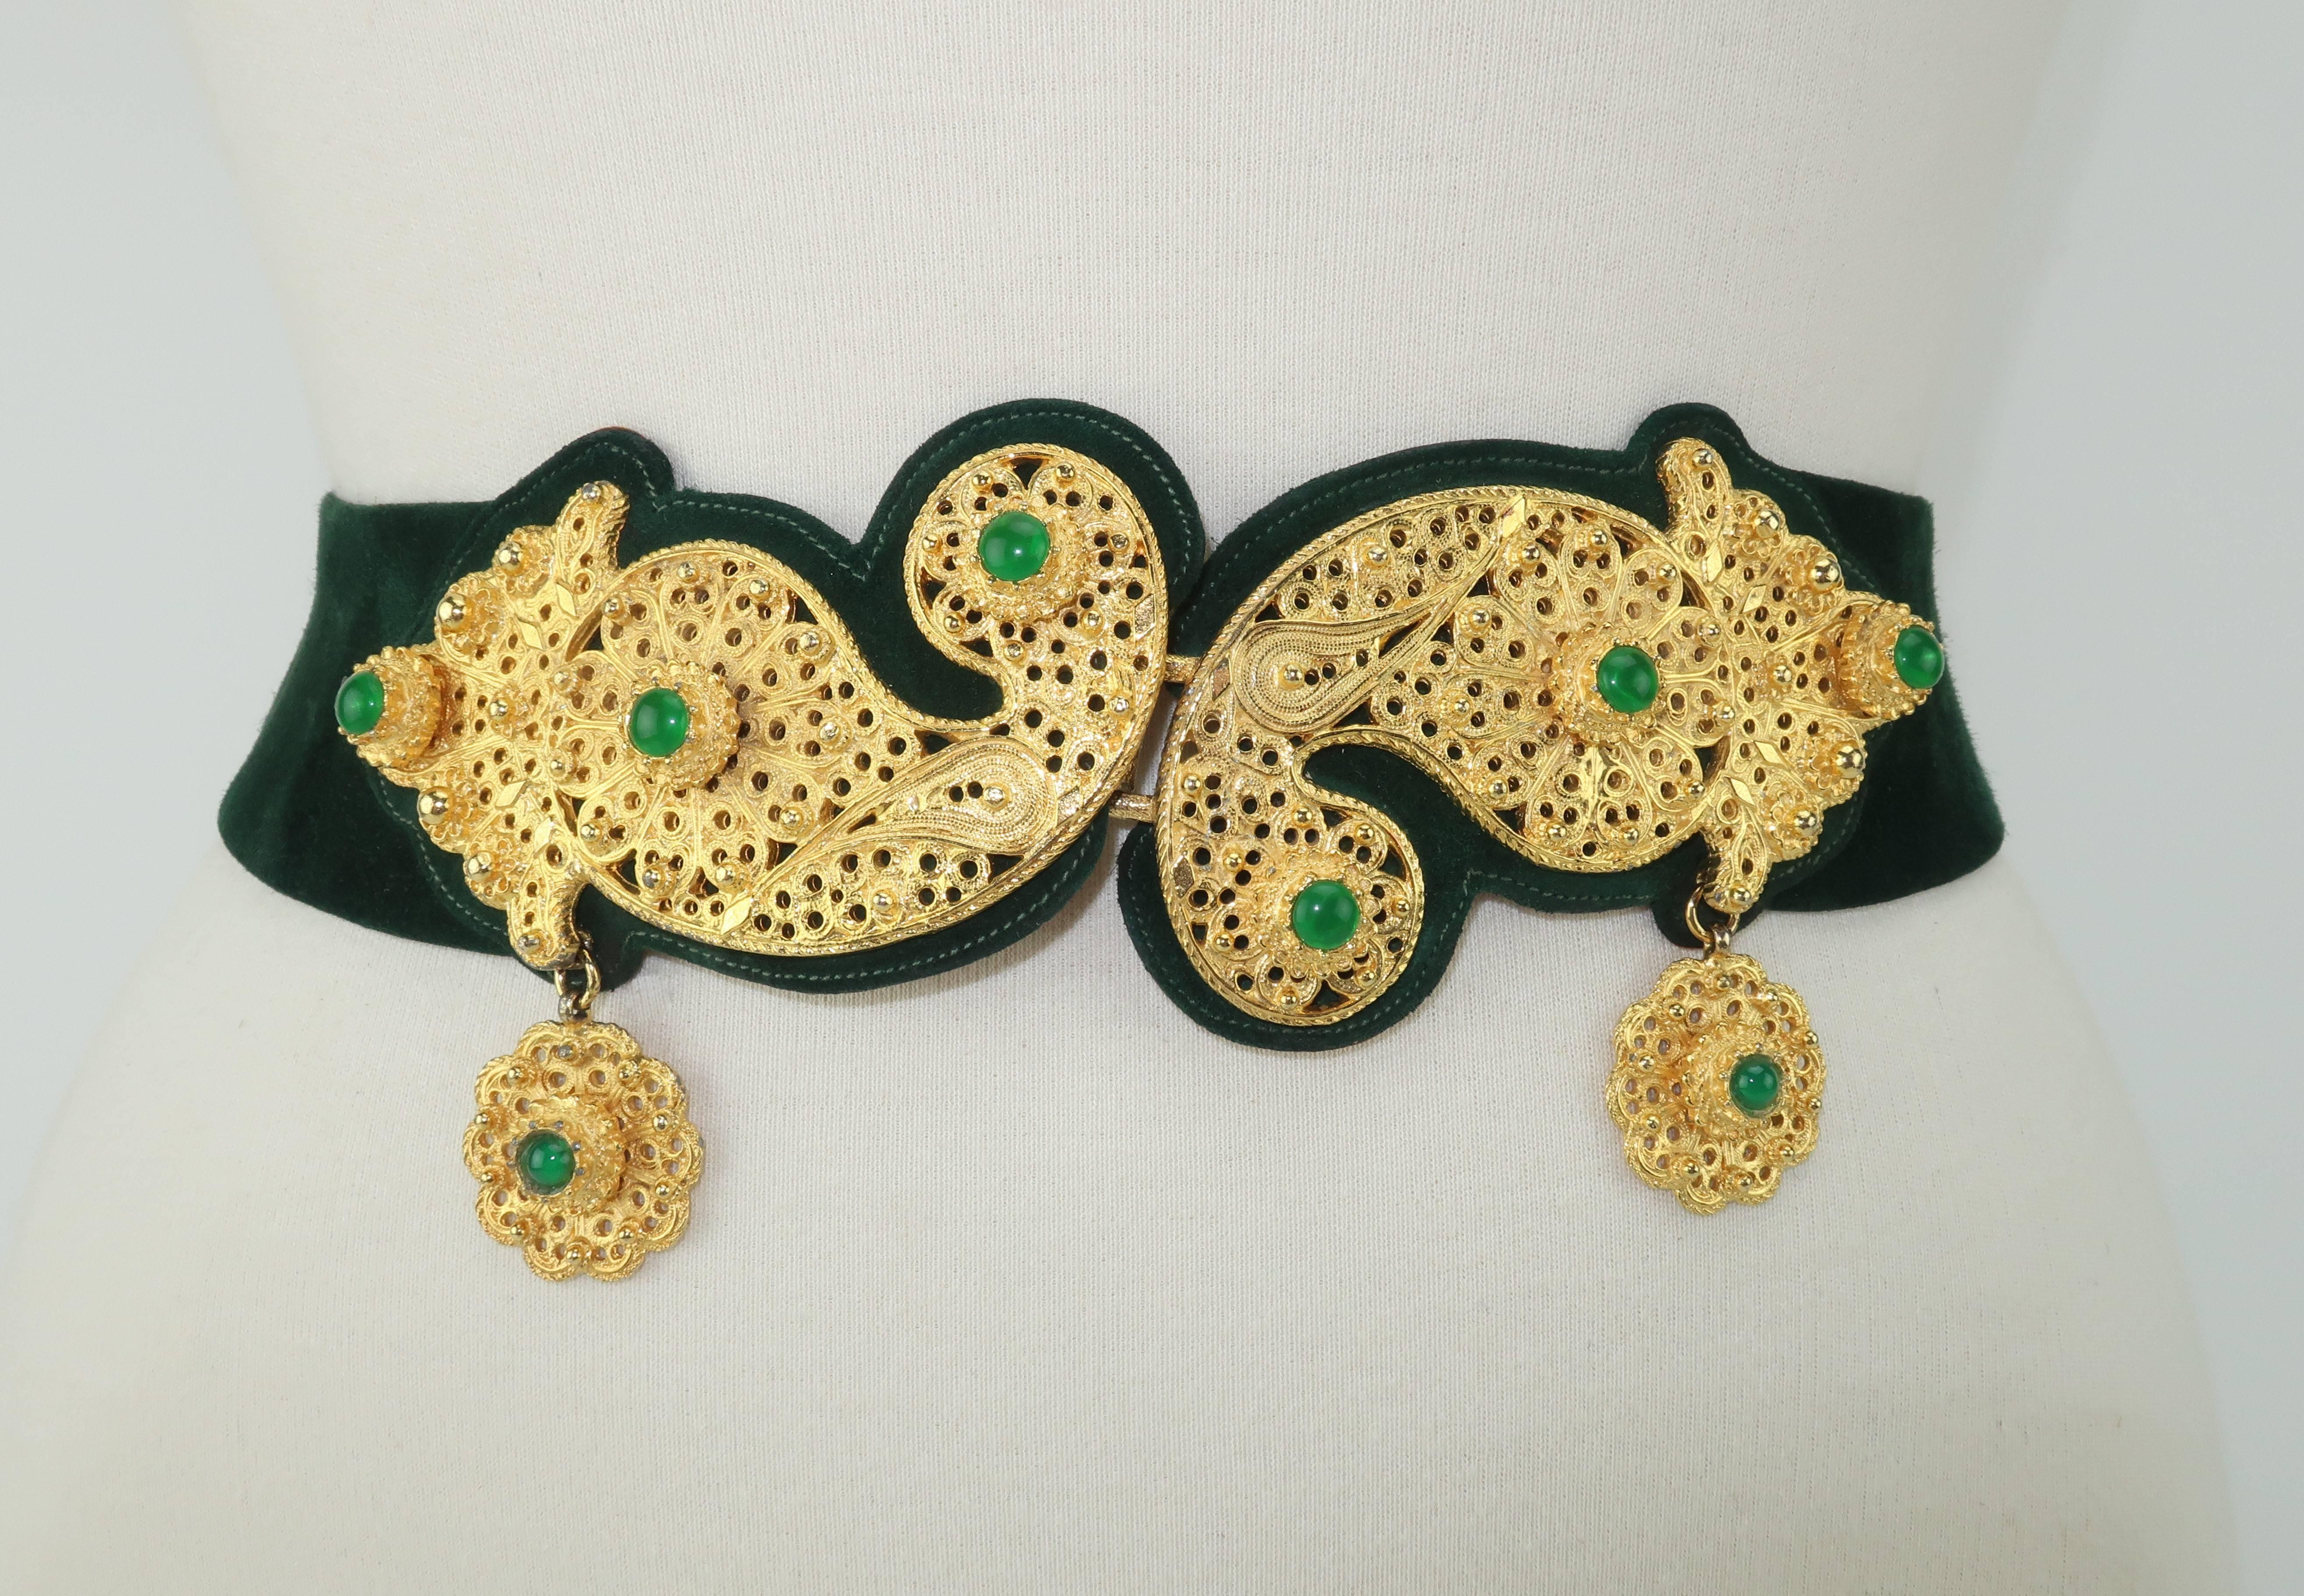 Opulence abounds with this rich Judith Leiber for Saks Fifth Avenue gold filigree green suede belt.  The detailed jewelry style metalwork buckle has an exotic Kashmir type paisley design with faux emerald cabochons and dangling charms.  The buckle